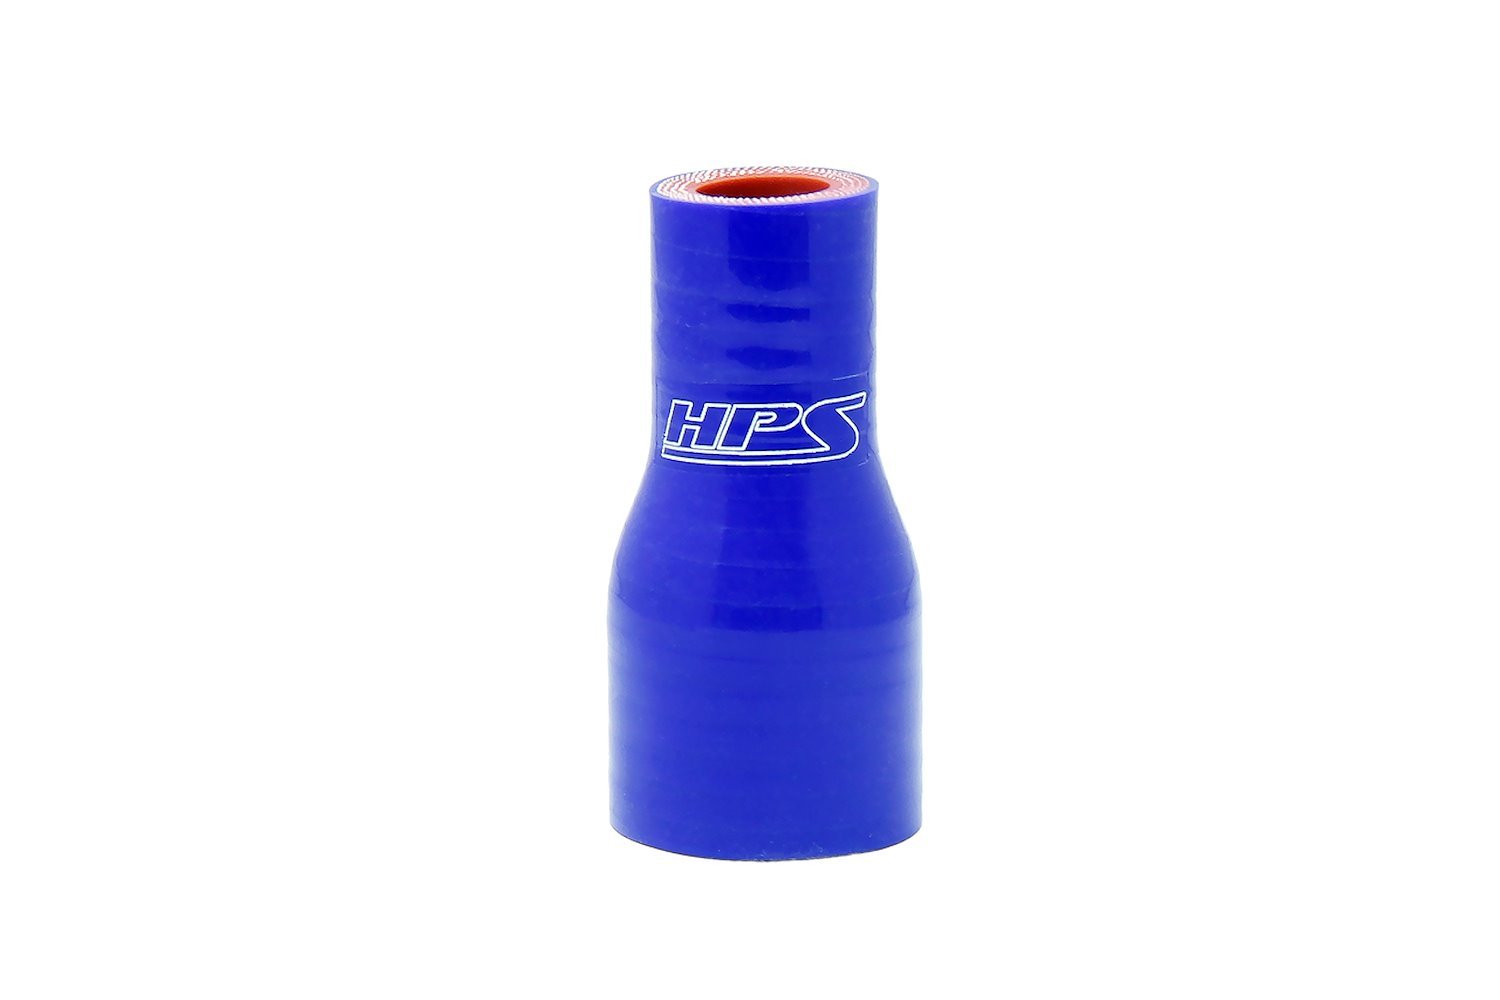 HTSR-100-125-L4-BLUE Silicone Reducer Hose, High-Temp 4-Ply Reinforced, 1 in. - 1-1/4 in. ID, 4 in. Long, Blue